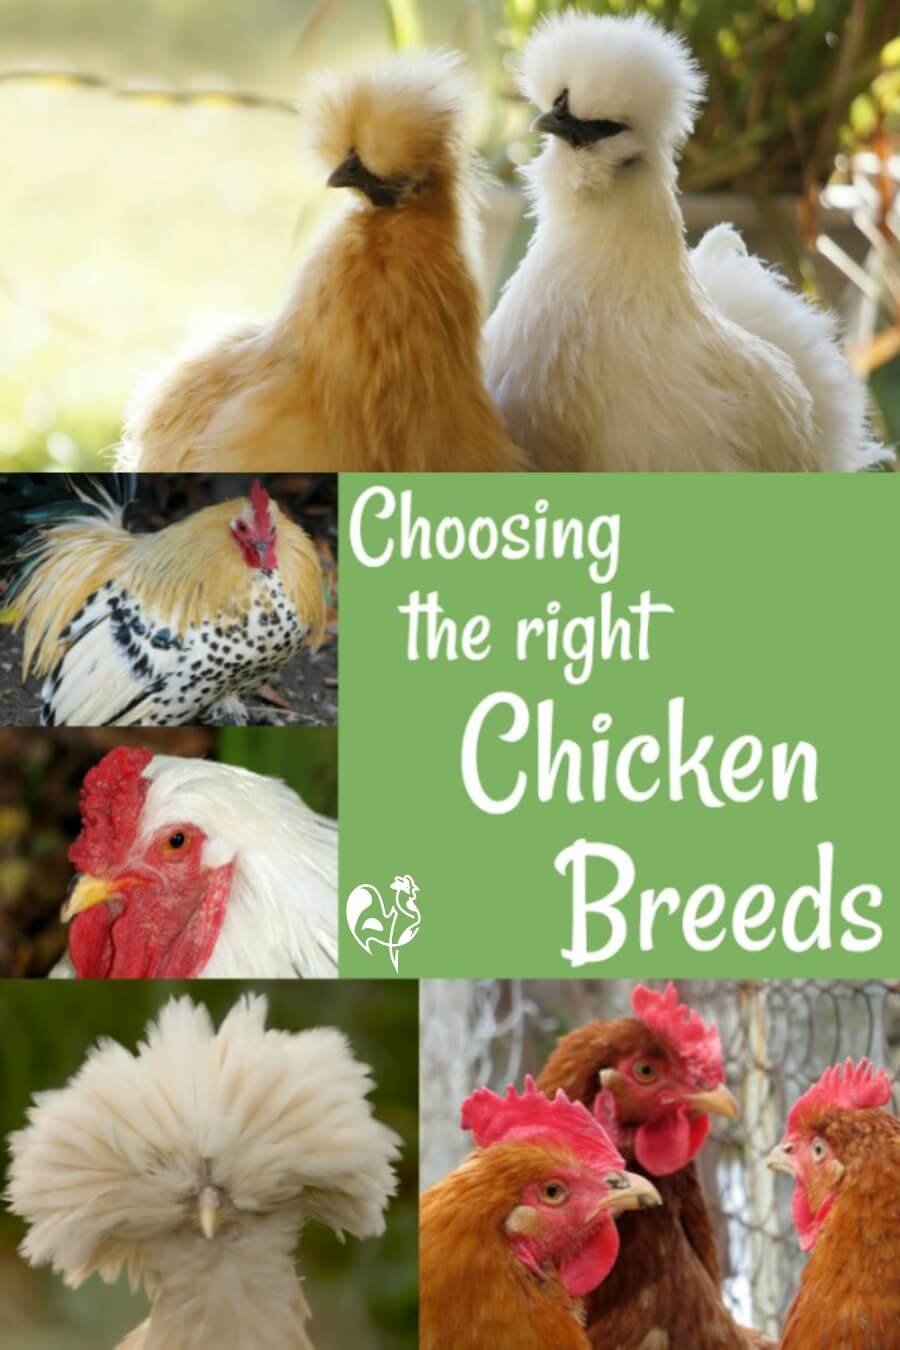 Backyard chicken breeds - with pictures!